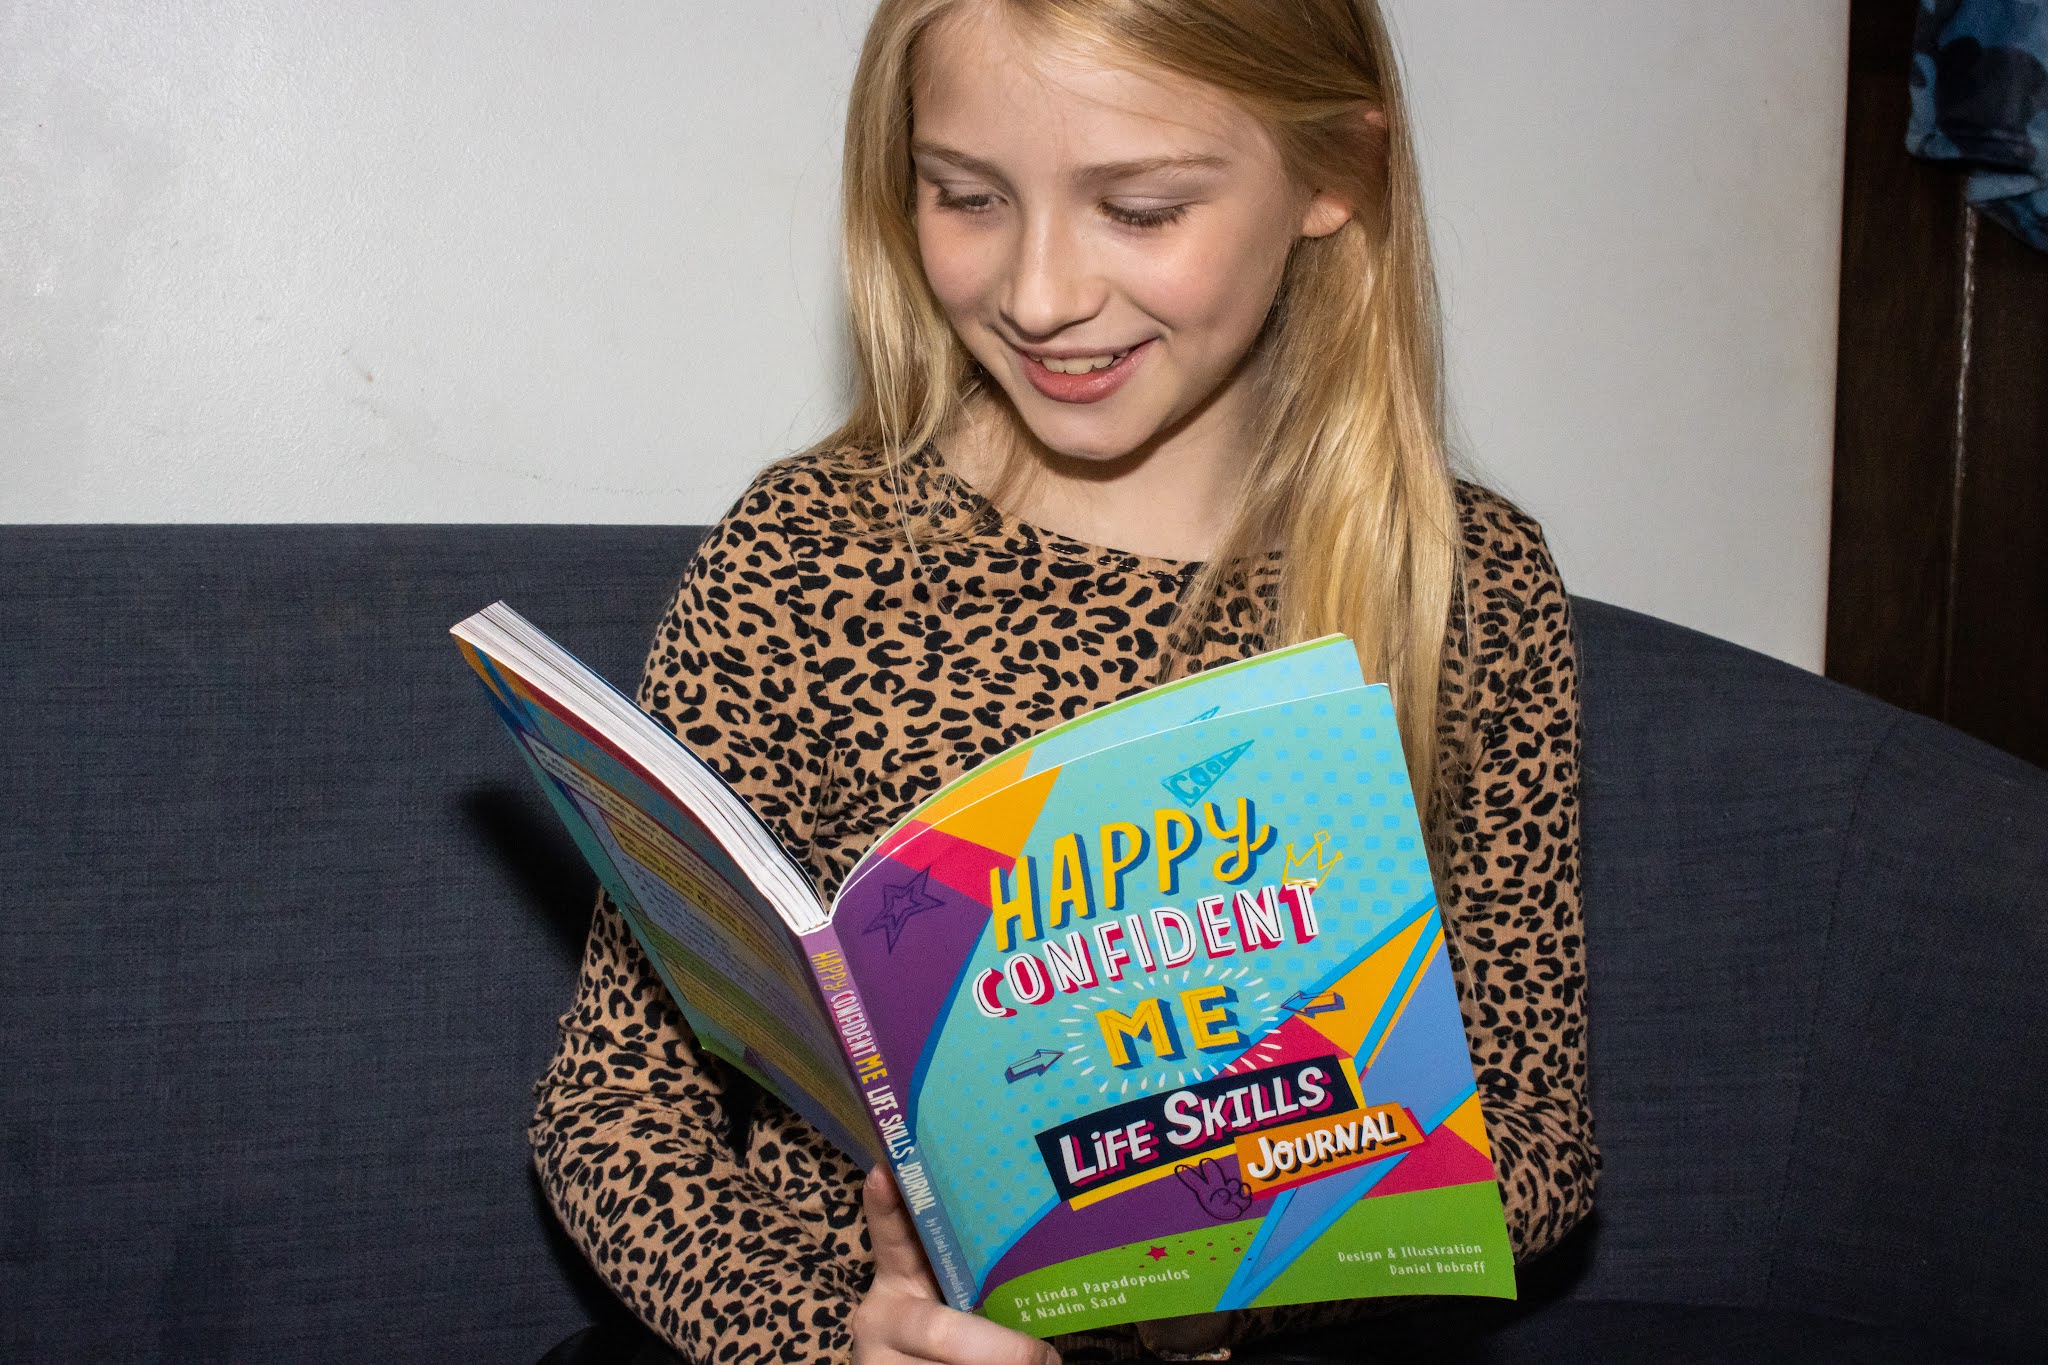 A tween girl reading the Happy Confident Me Life Skills Journal